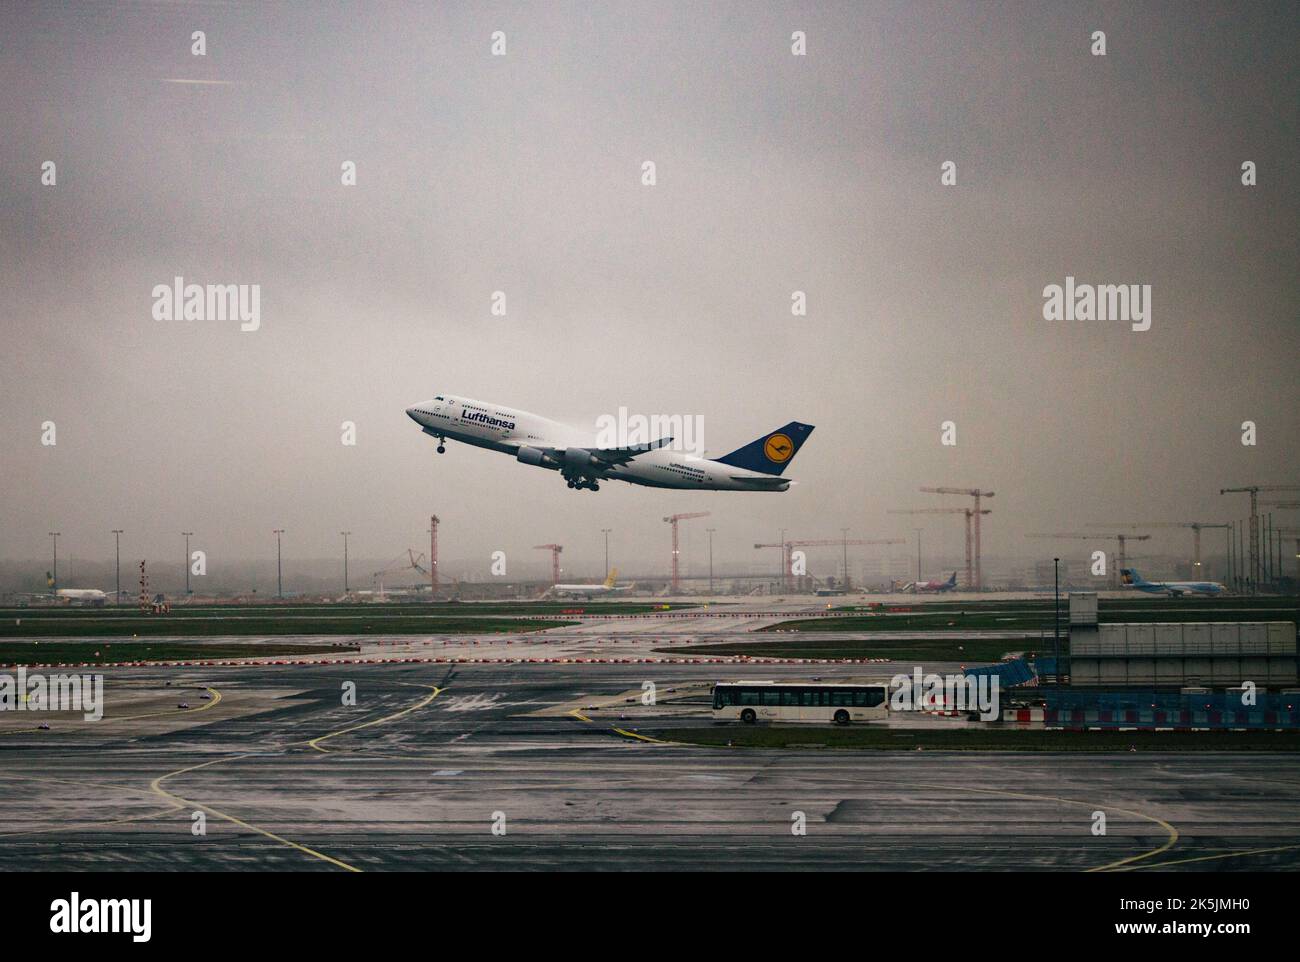 A Lufthansa plane taking off from the Frankfurt airport under a gloomy sky on a rainy day in Germany Stock Photo